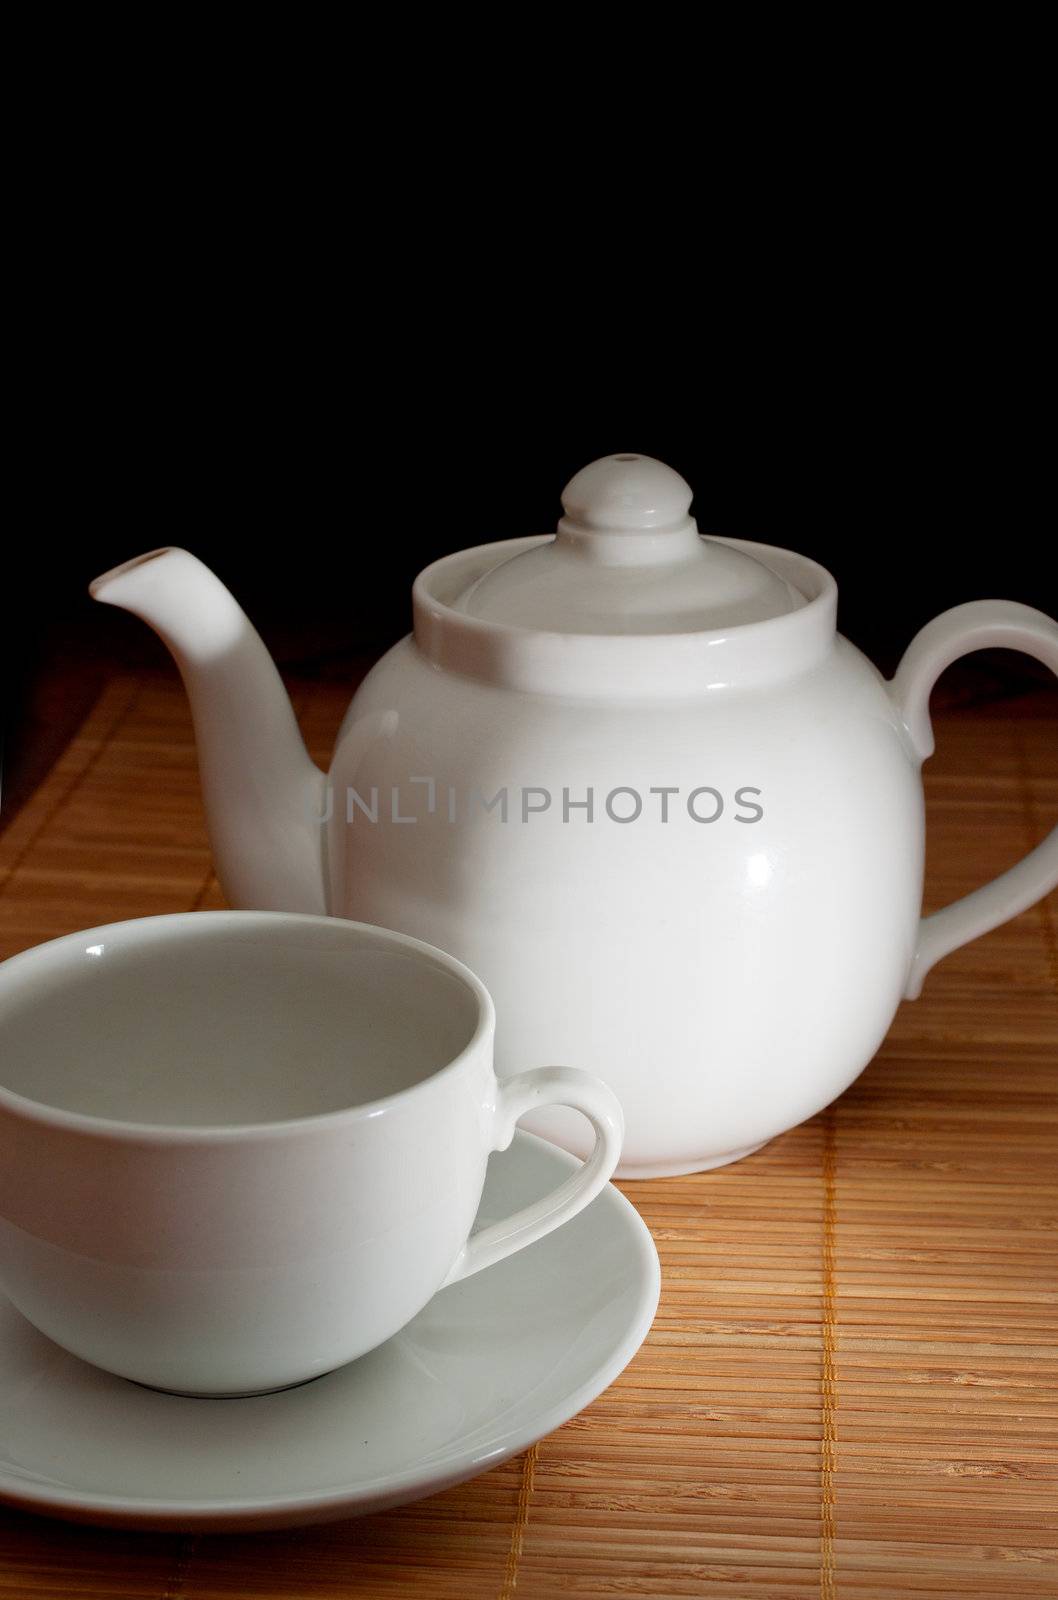 Cup and teapot by rbv